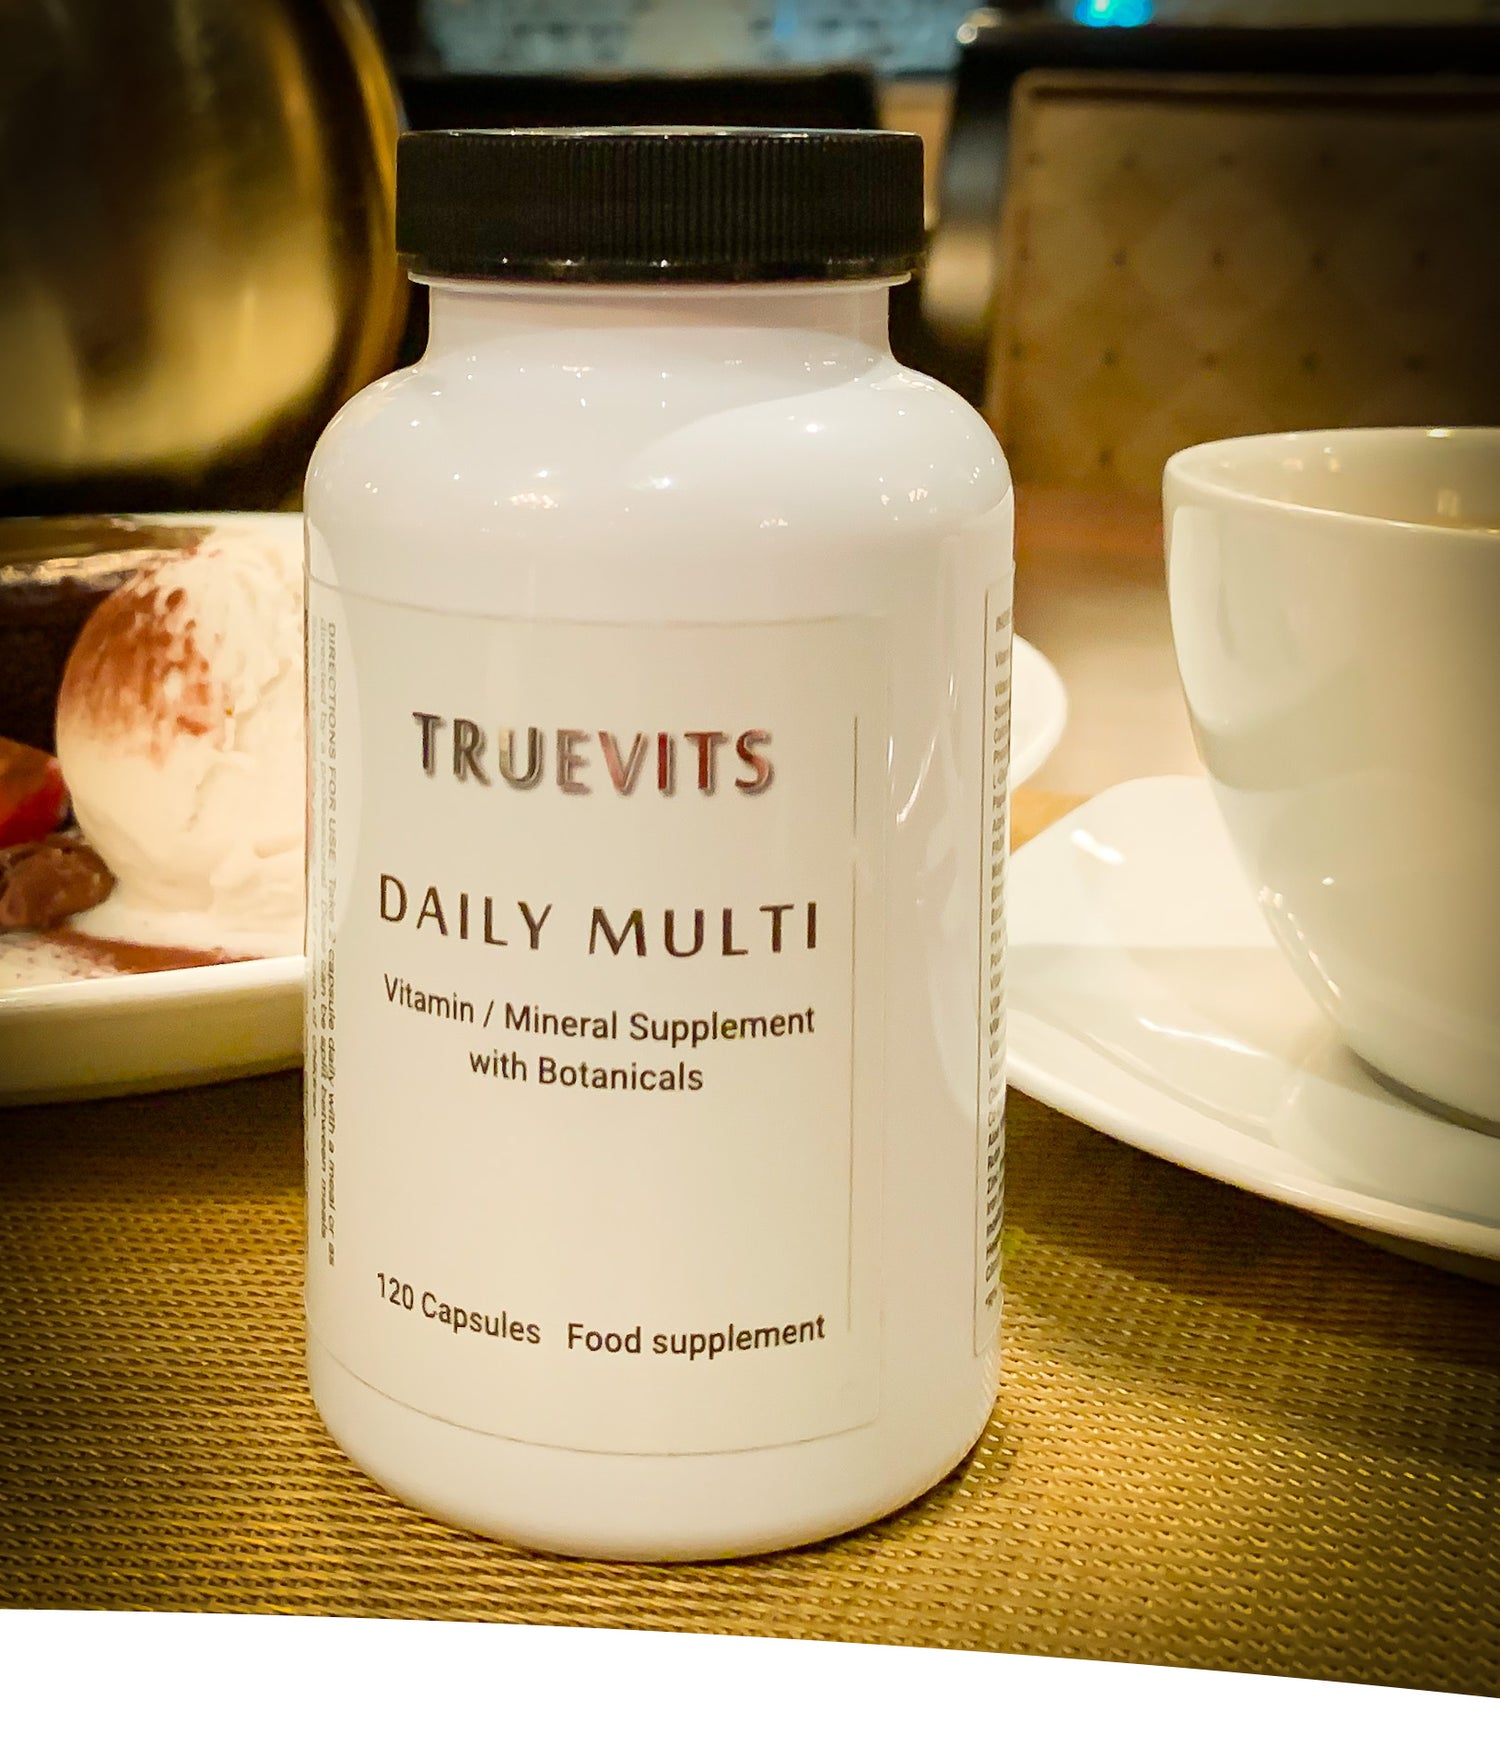 Daily-Multi-vitamin-mineral-supplement-on-dining-table-with-white-cup-of-coffee-on-sauser-and-ice-cream